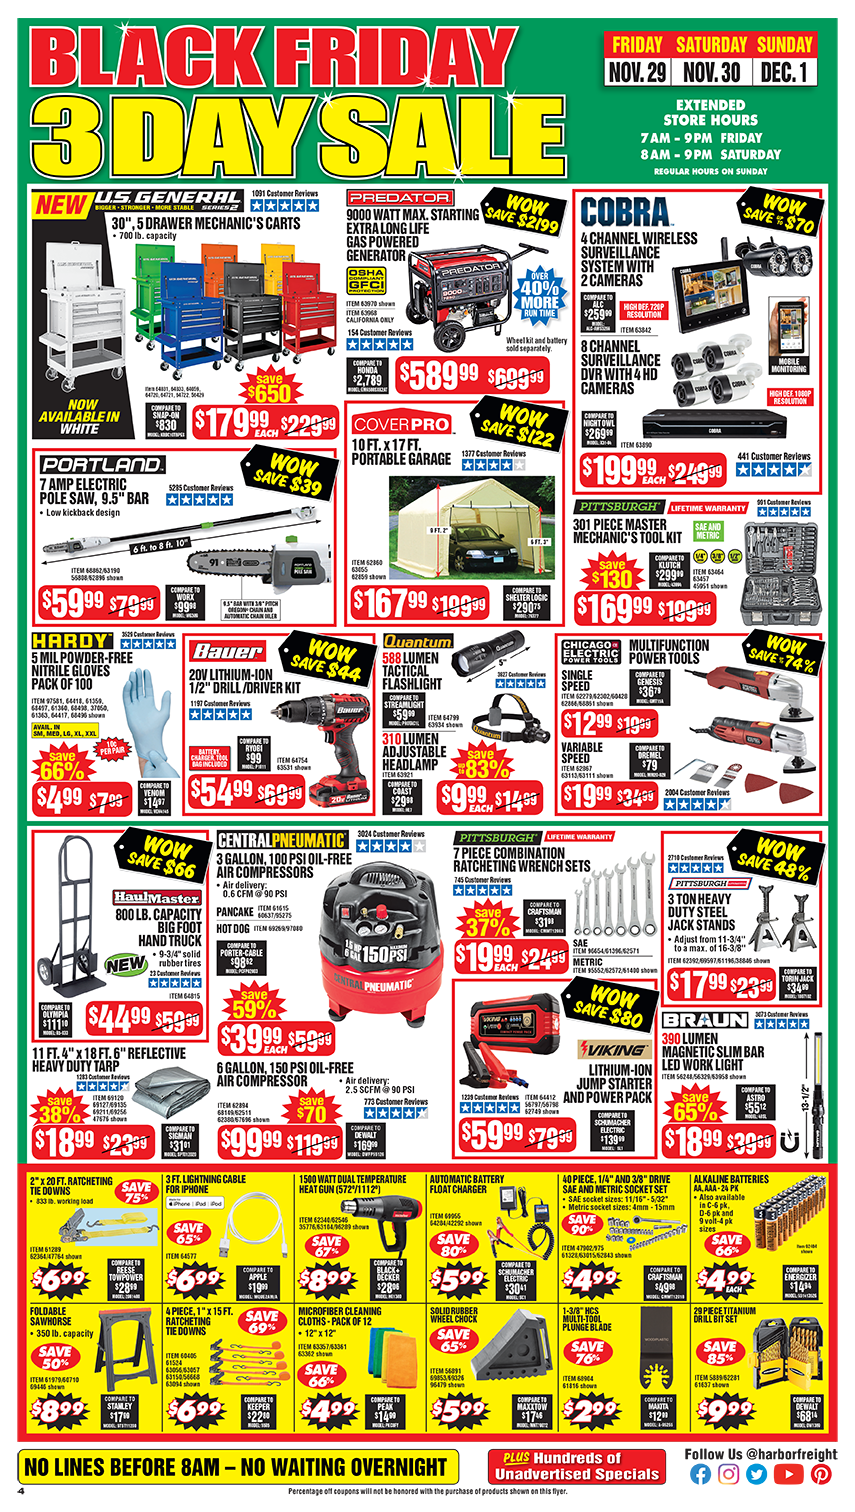 Black Friday Deals At Harbor Freight Harbor Freight Coupons